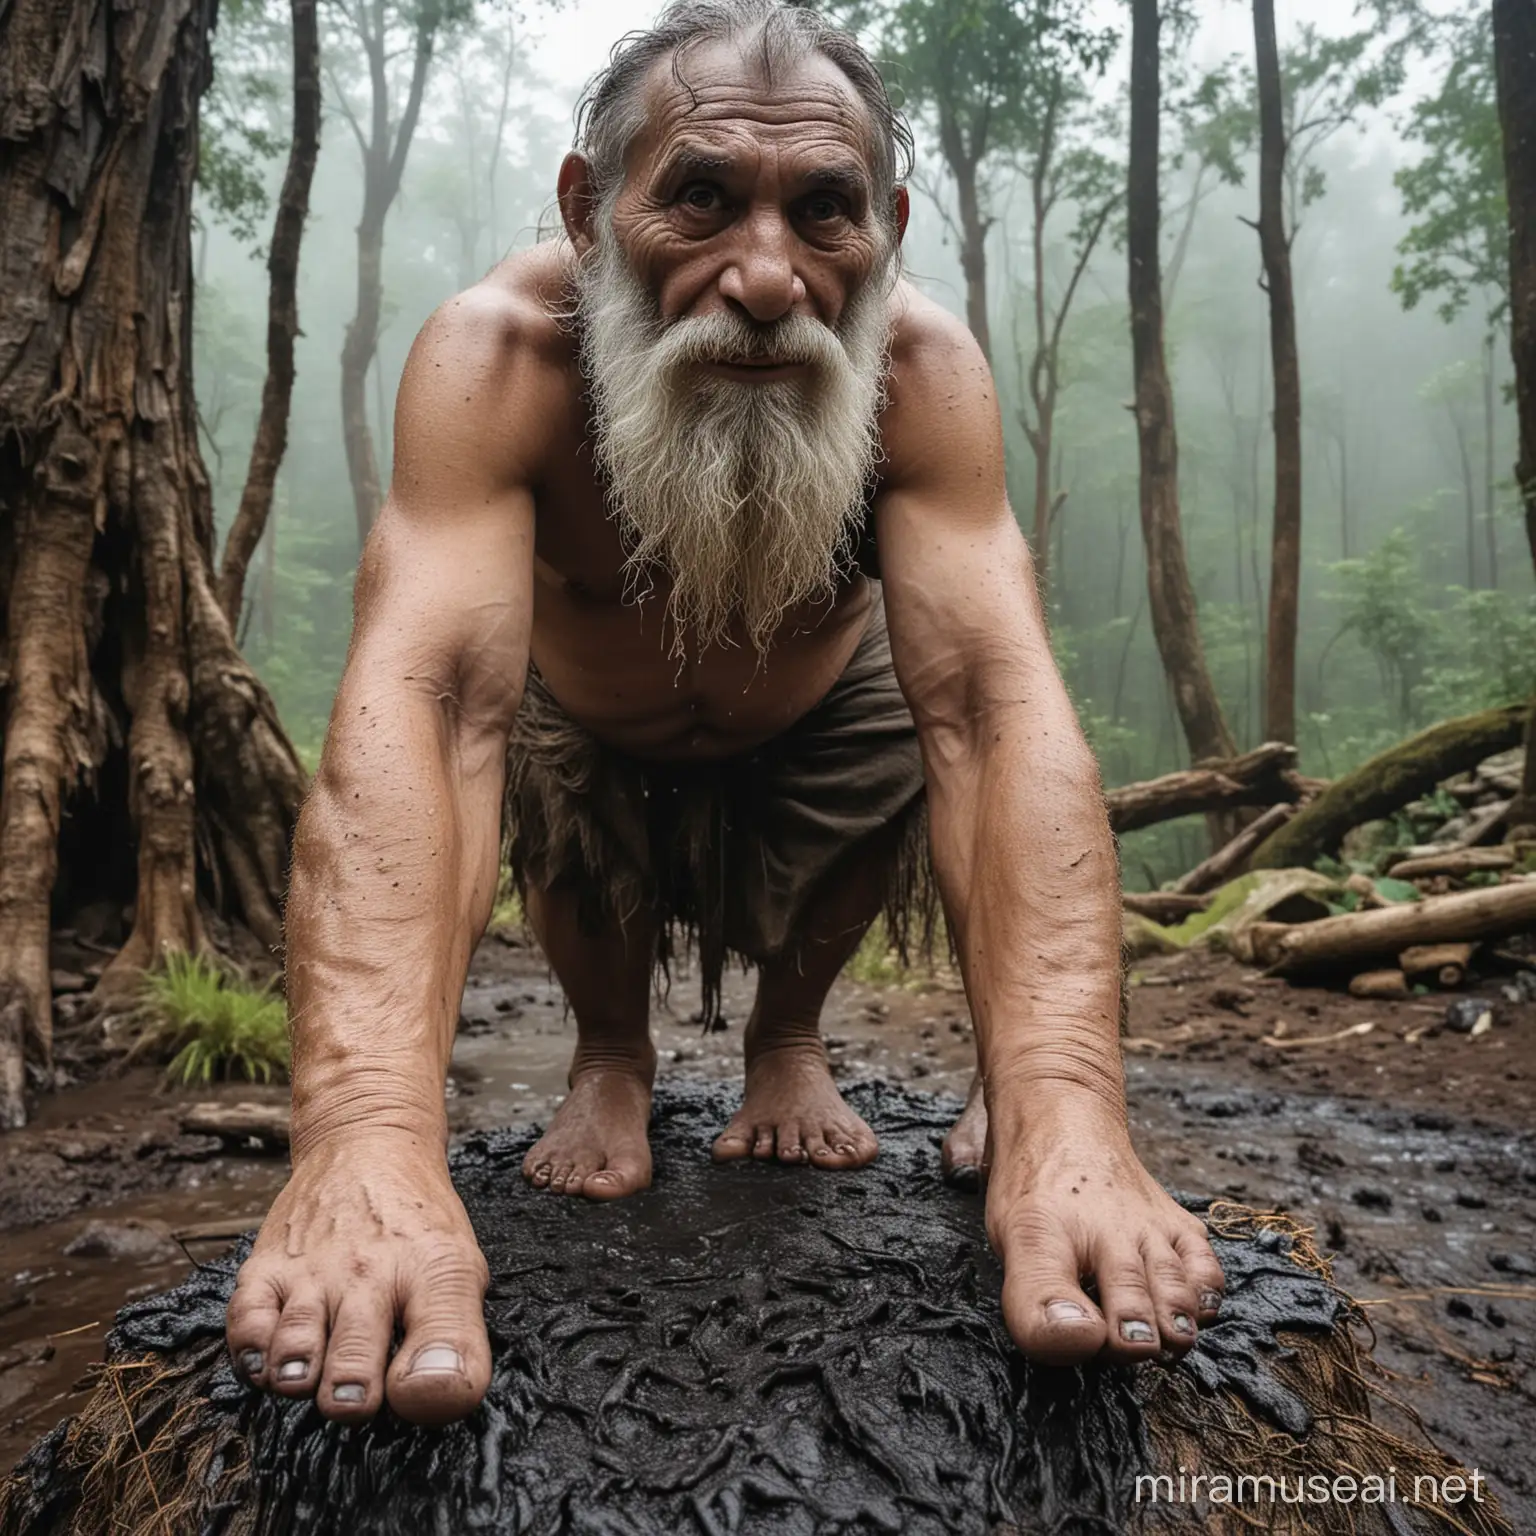 Old Troll Standing on Tree Trunk in Rainy Mountain Landscape